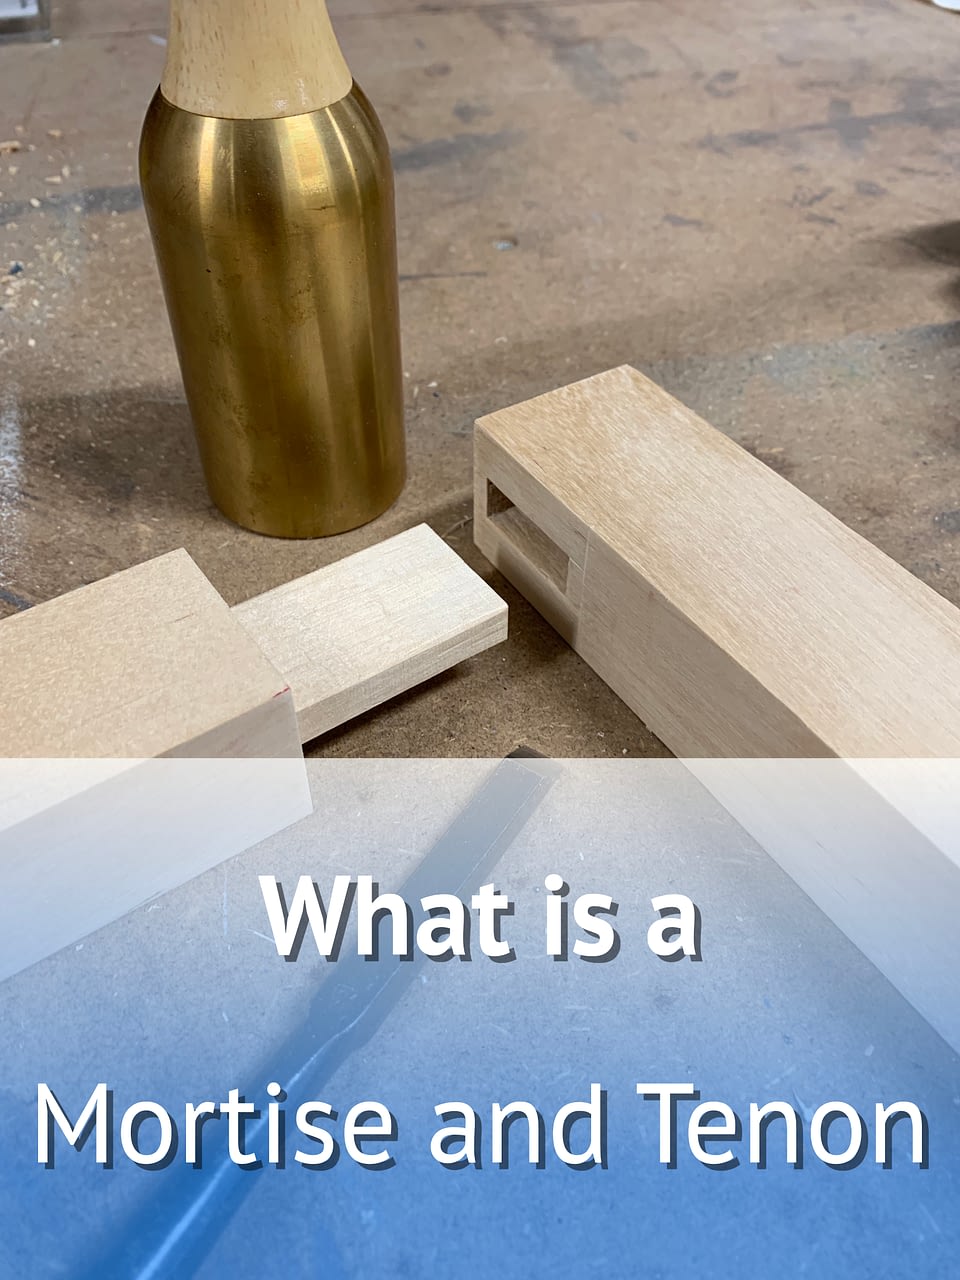 What is a mortise and tenon